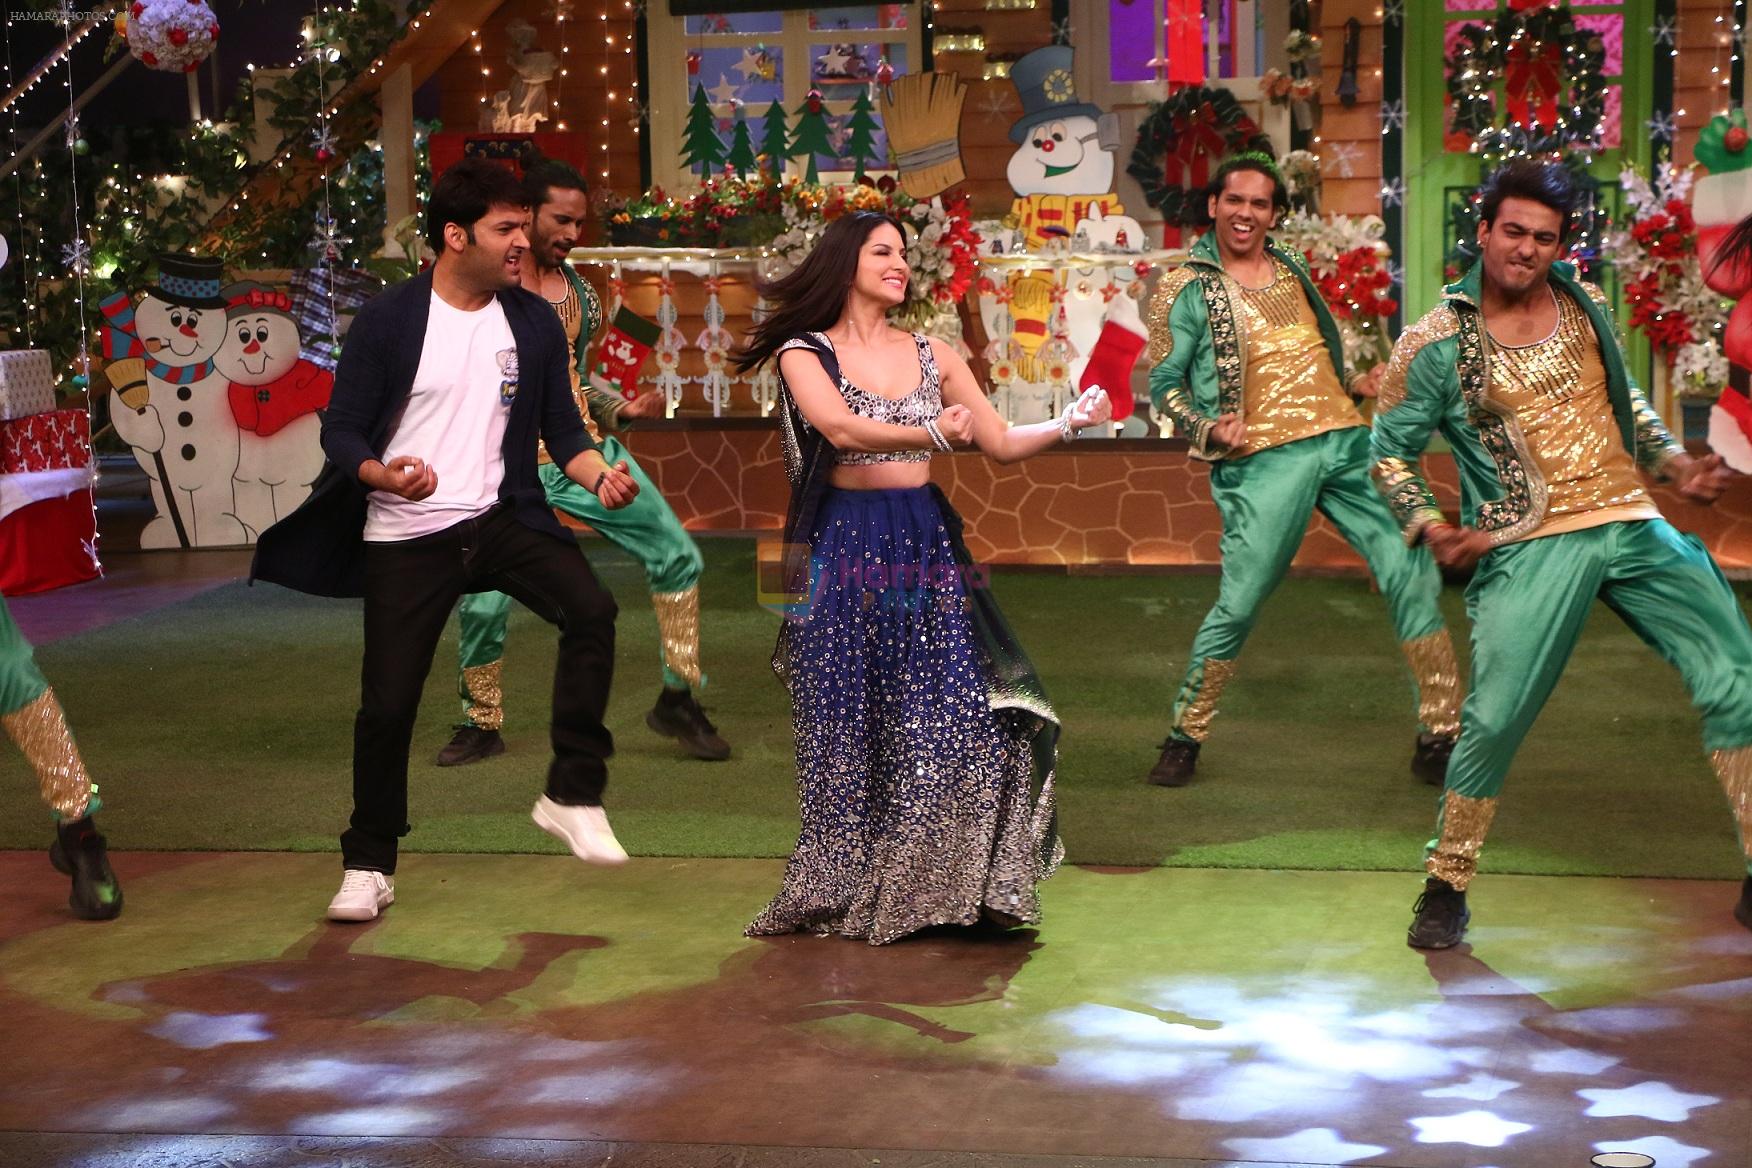 Sunny Leone and her husband Daniel Weber on the sets of The Kapil Sharma Show on 24th Dec 2016